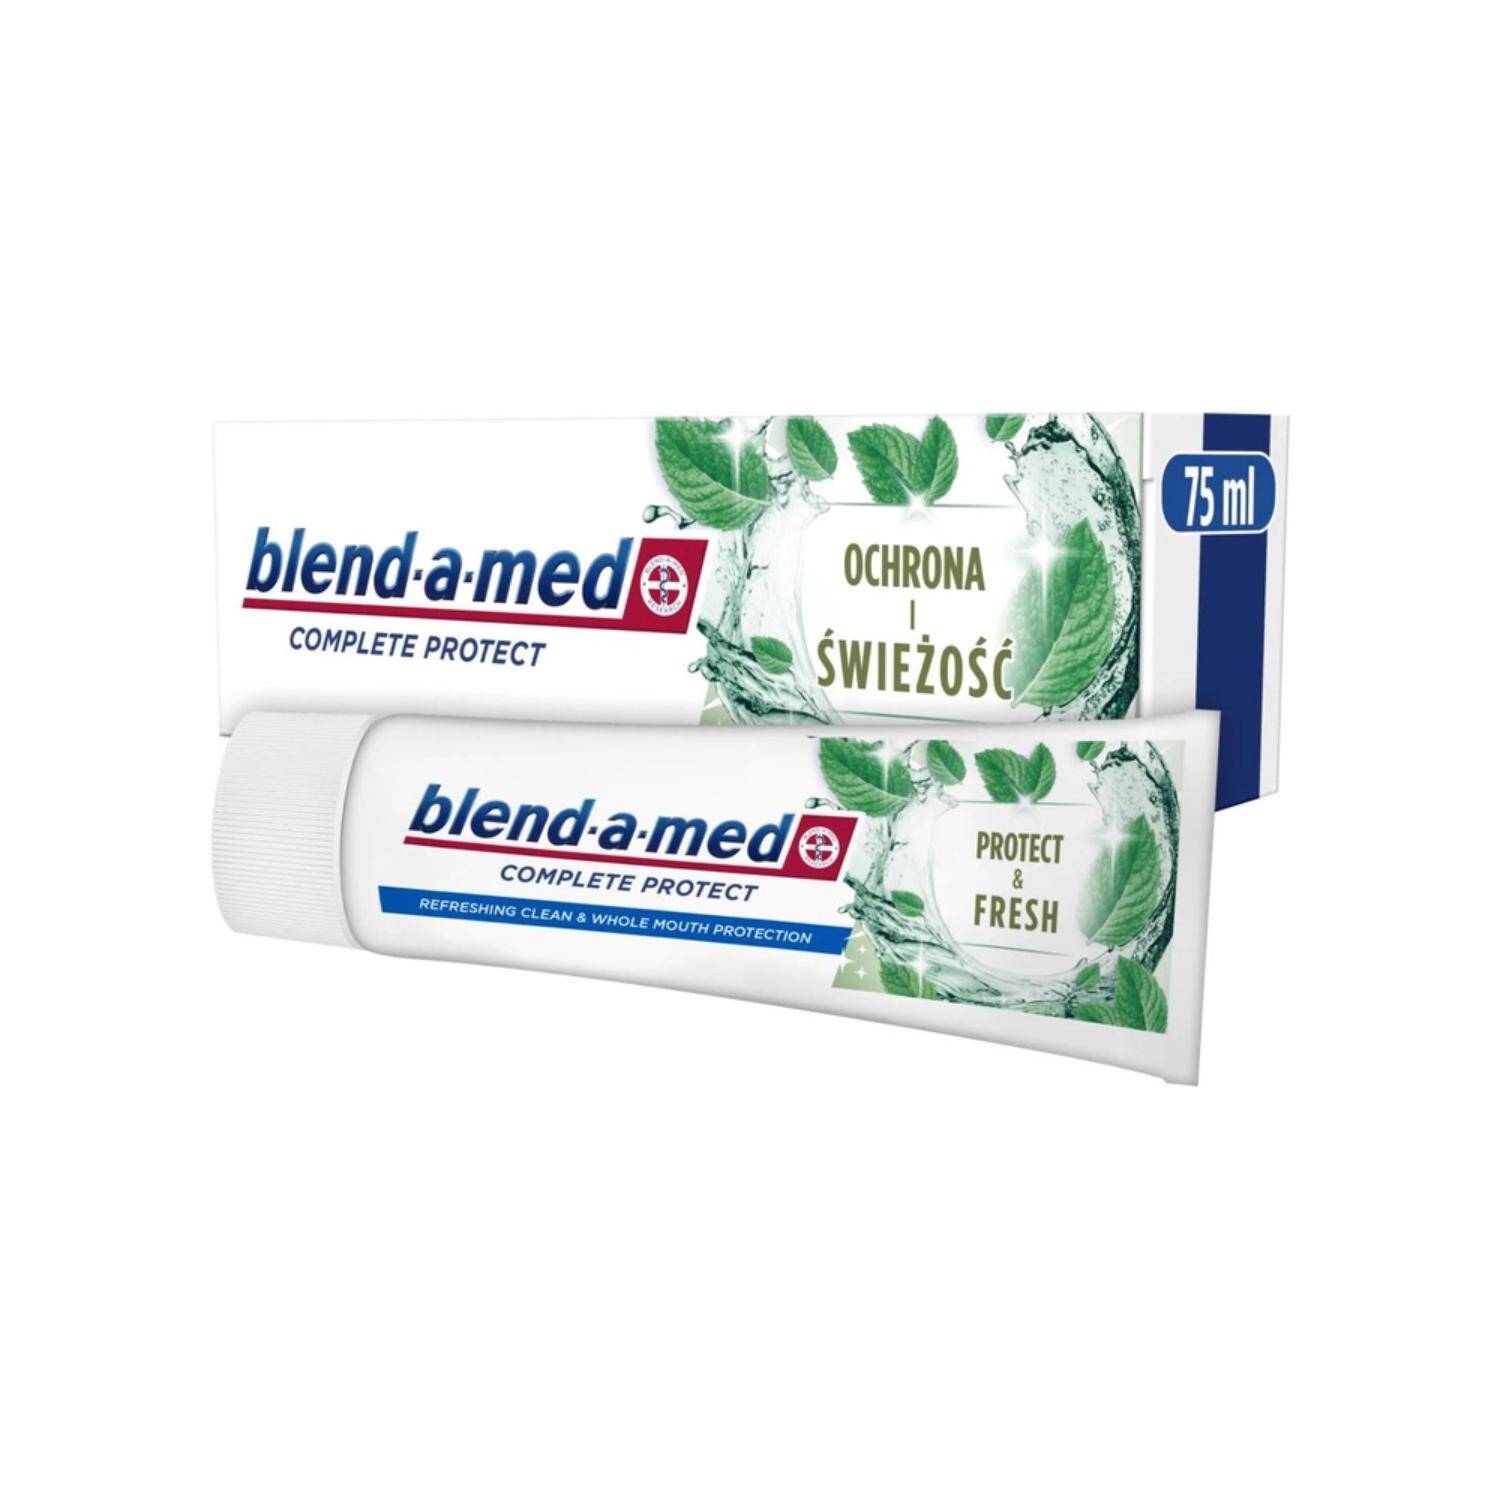 Blend-a-med - Complete Protect and Fresh, pasta do zębów, 75 ml